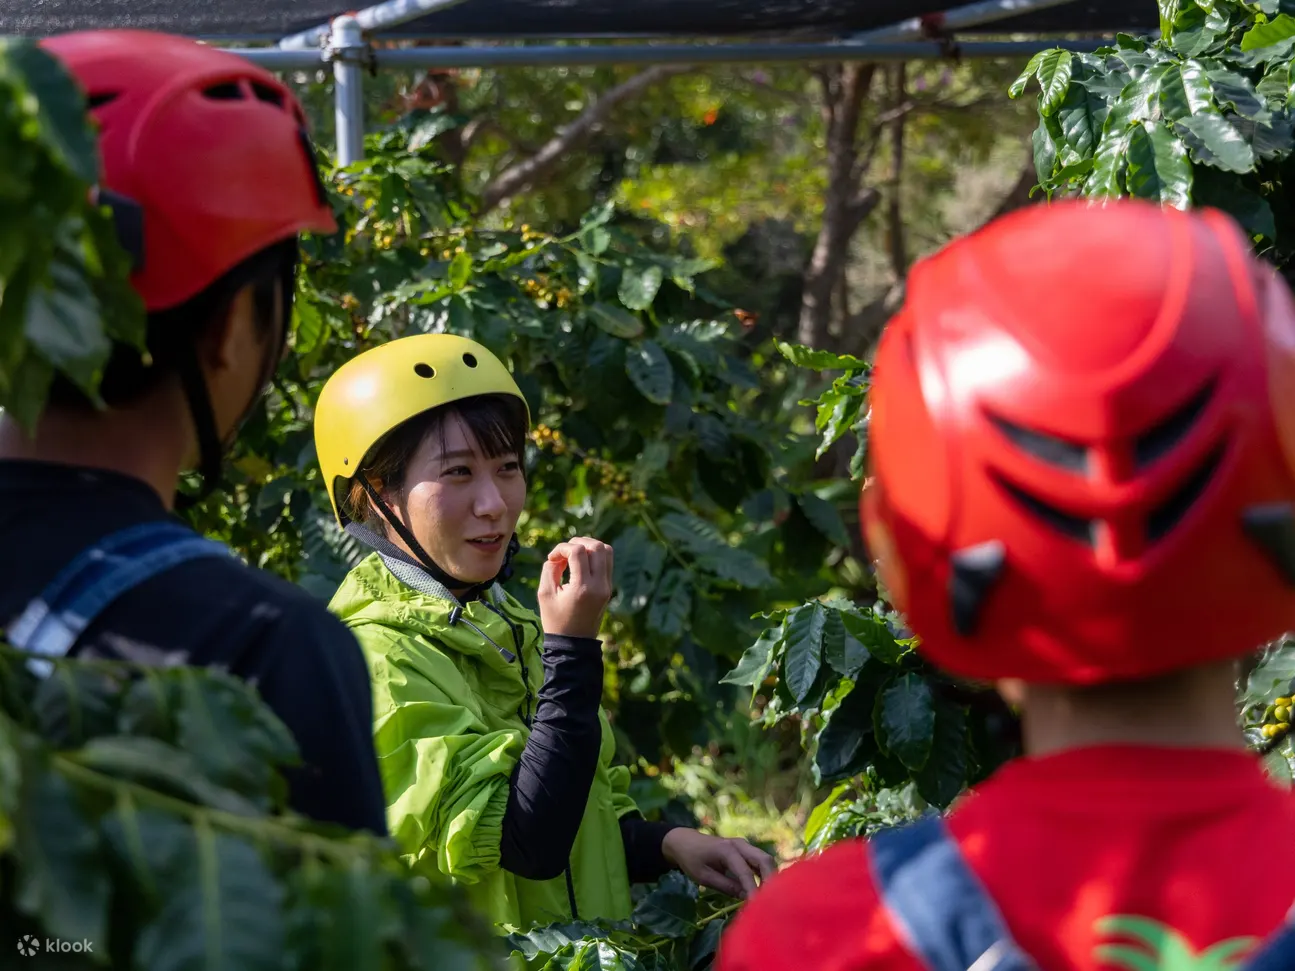 Book ATV and Hummer Adventure in Okinawa Online - Choose Your ATV Course in Okinawa